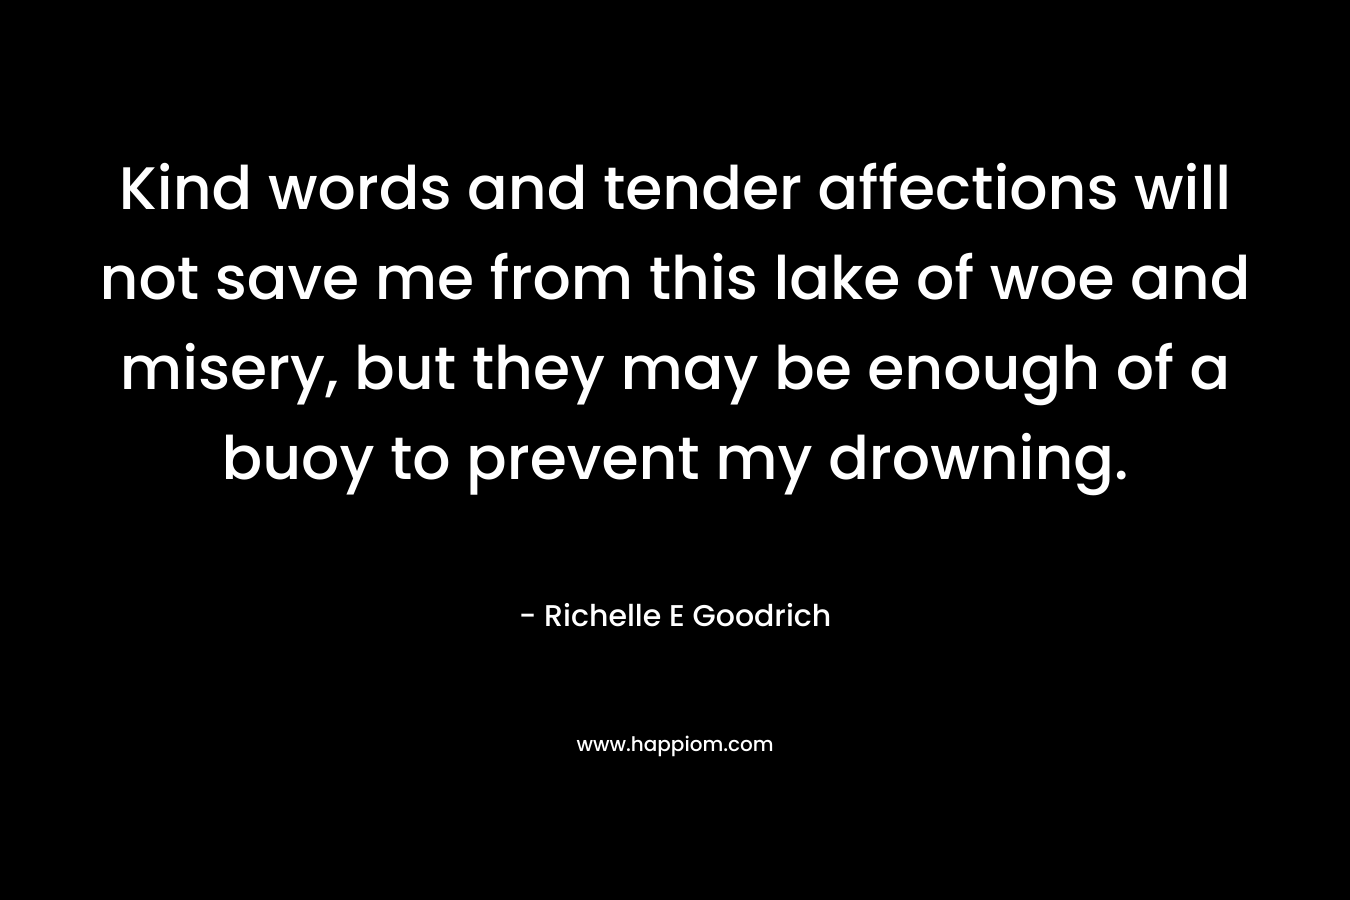 Kind words and tender affections will not save me from this lake of woe and misery, but they may be enough of a buoy to prevent my drowning.